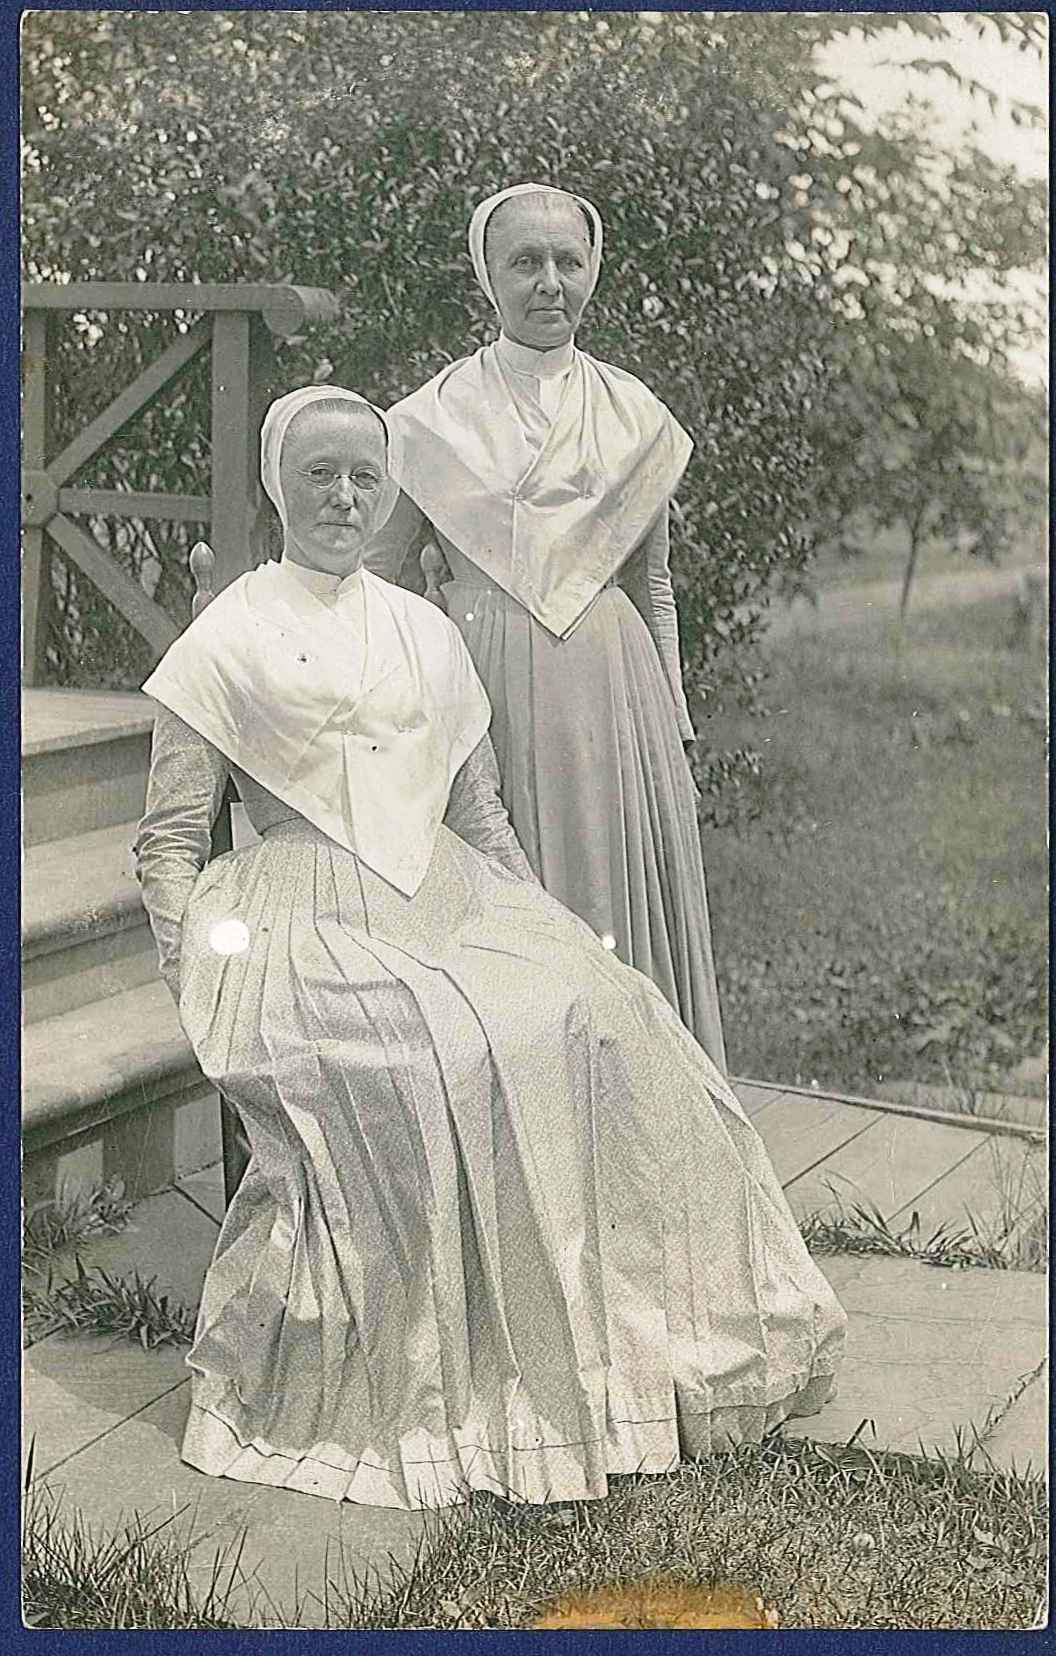 Two women dressed in white sitting on steps.